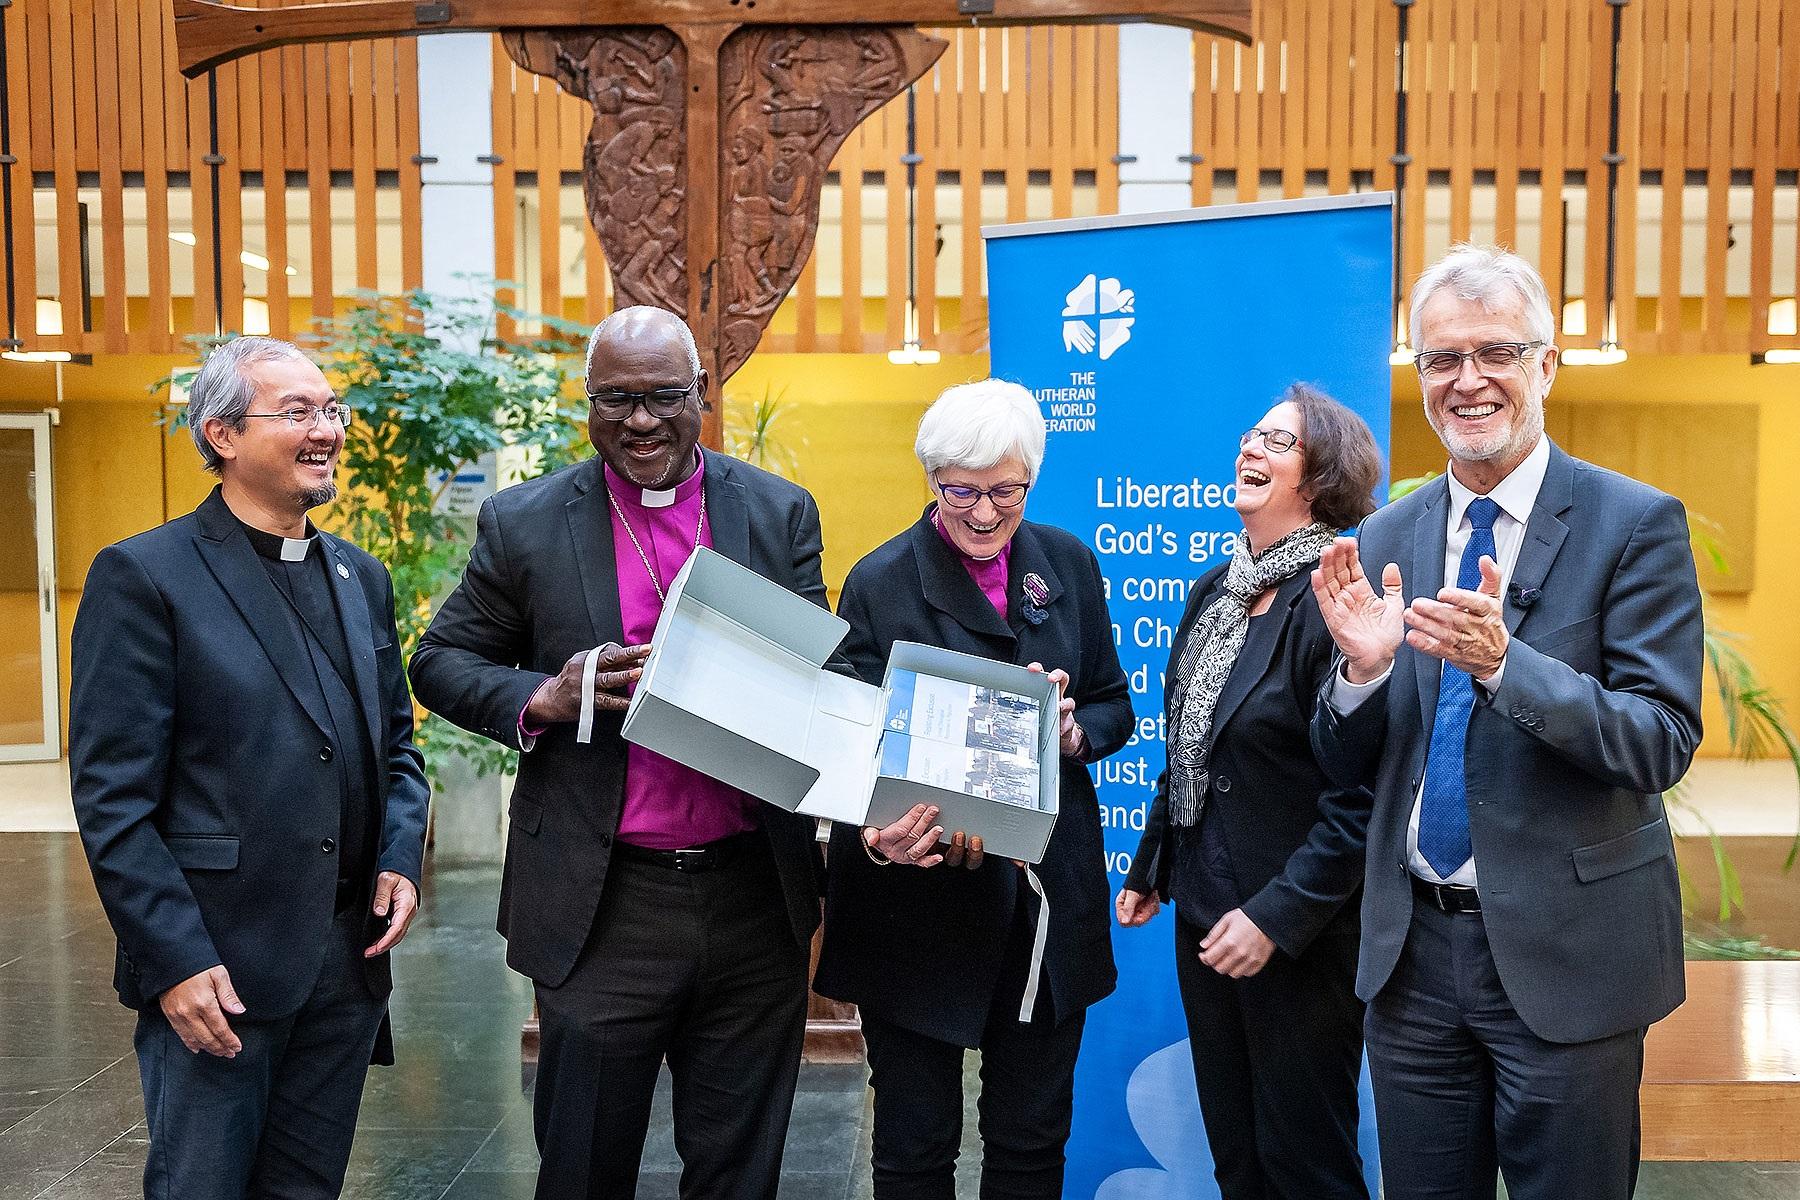 LWF President Archbishop Dr Panti Filibus Musa (second left) and Vice-President, Archbishop Dr Antje JackelÃ©n (middle) unveil the publication, Resisting Exclusion- Global Theological Responses to Populism, together with General Secretary Rev. Dr Martin Junge (far right), co-editor Rev. Dr Simone Sinn (second right) and Rev. Dr Sivin Kit (far left), LWF program executive for Public Theology and Interreligious Relations. Photo: LWF/S. Gallay  